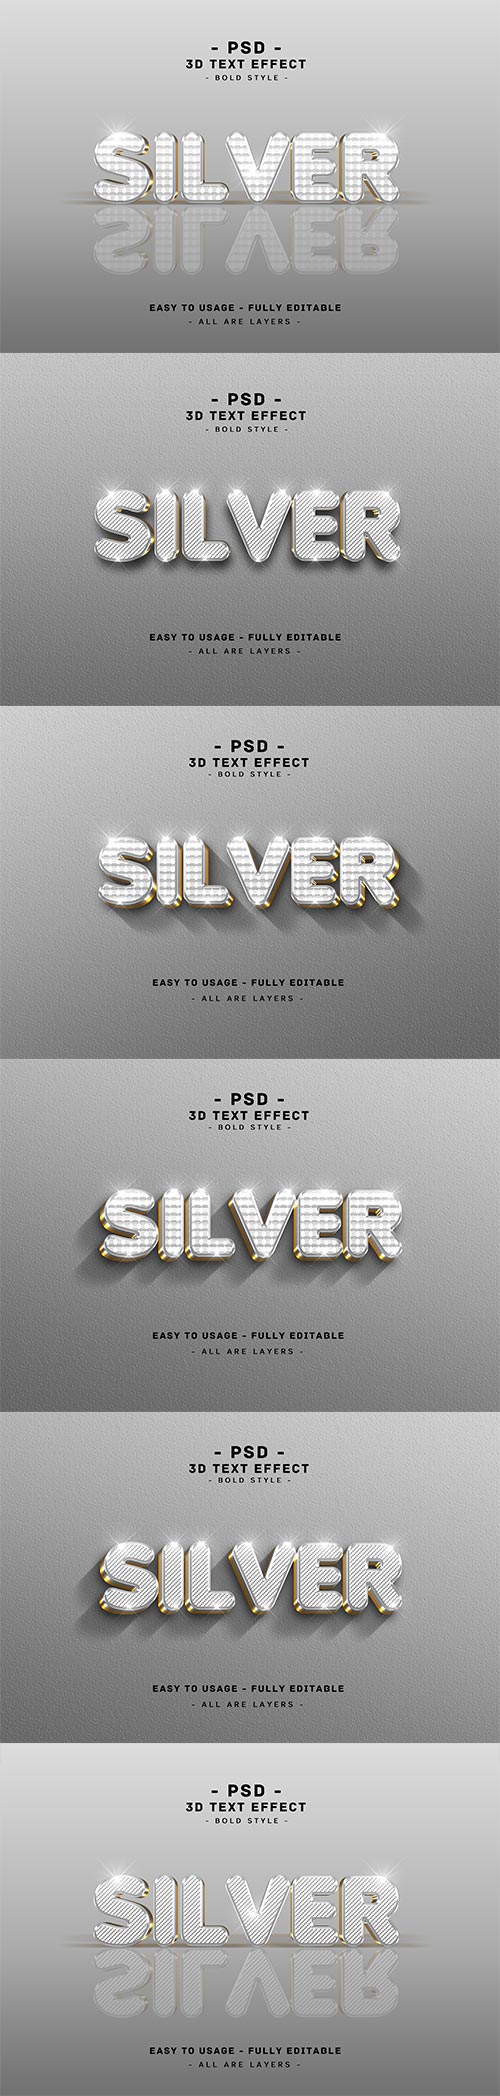 3d silver text style effect psd